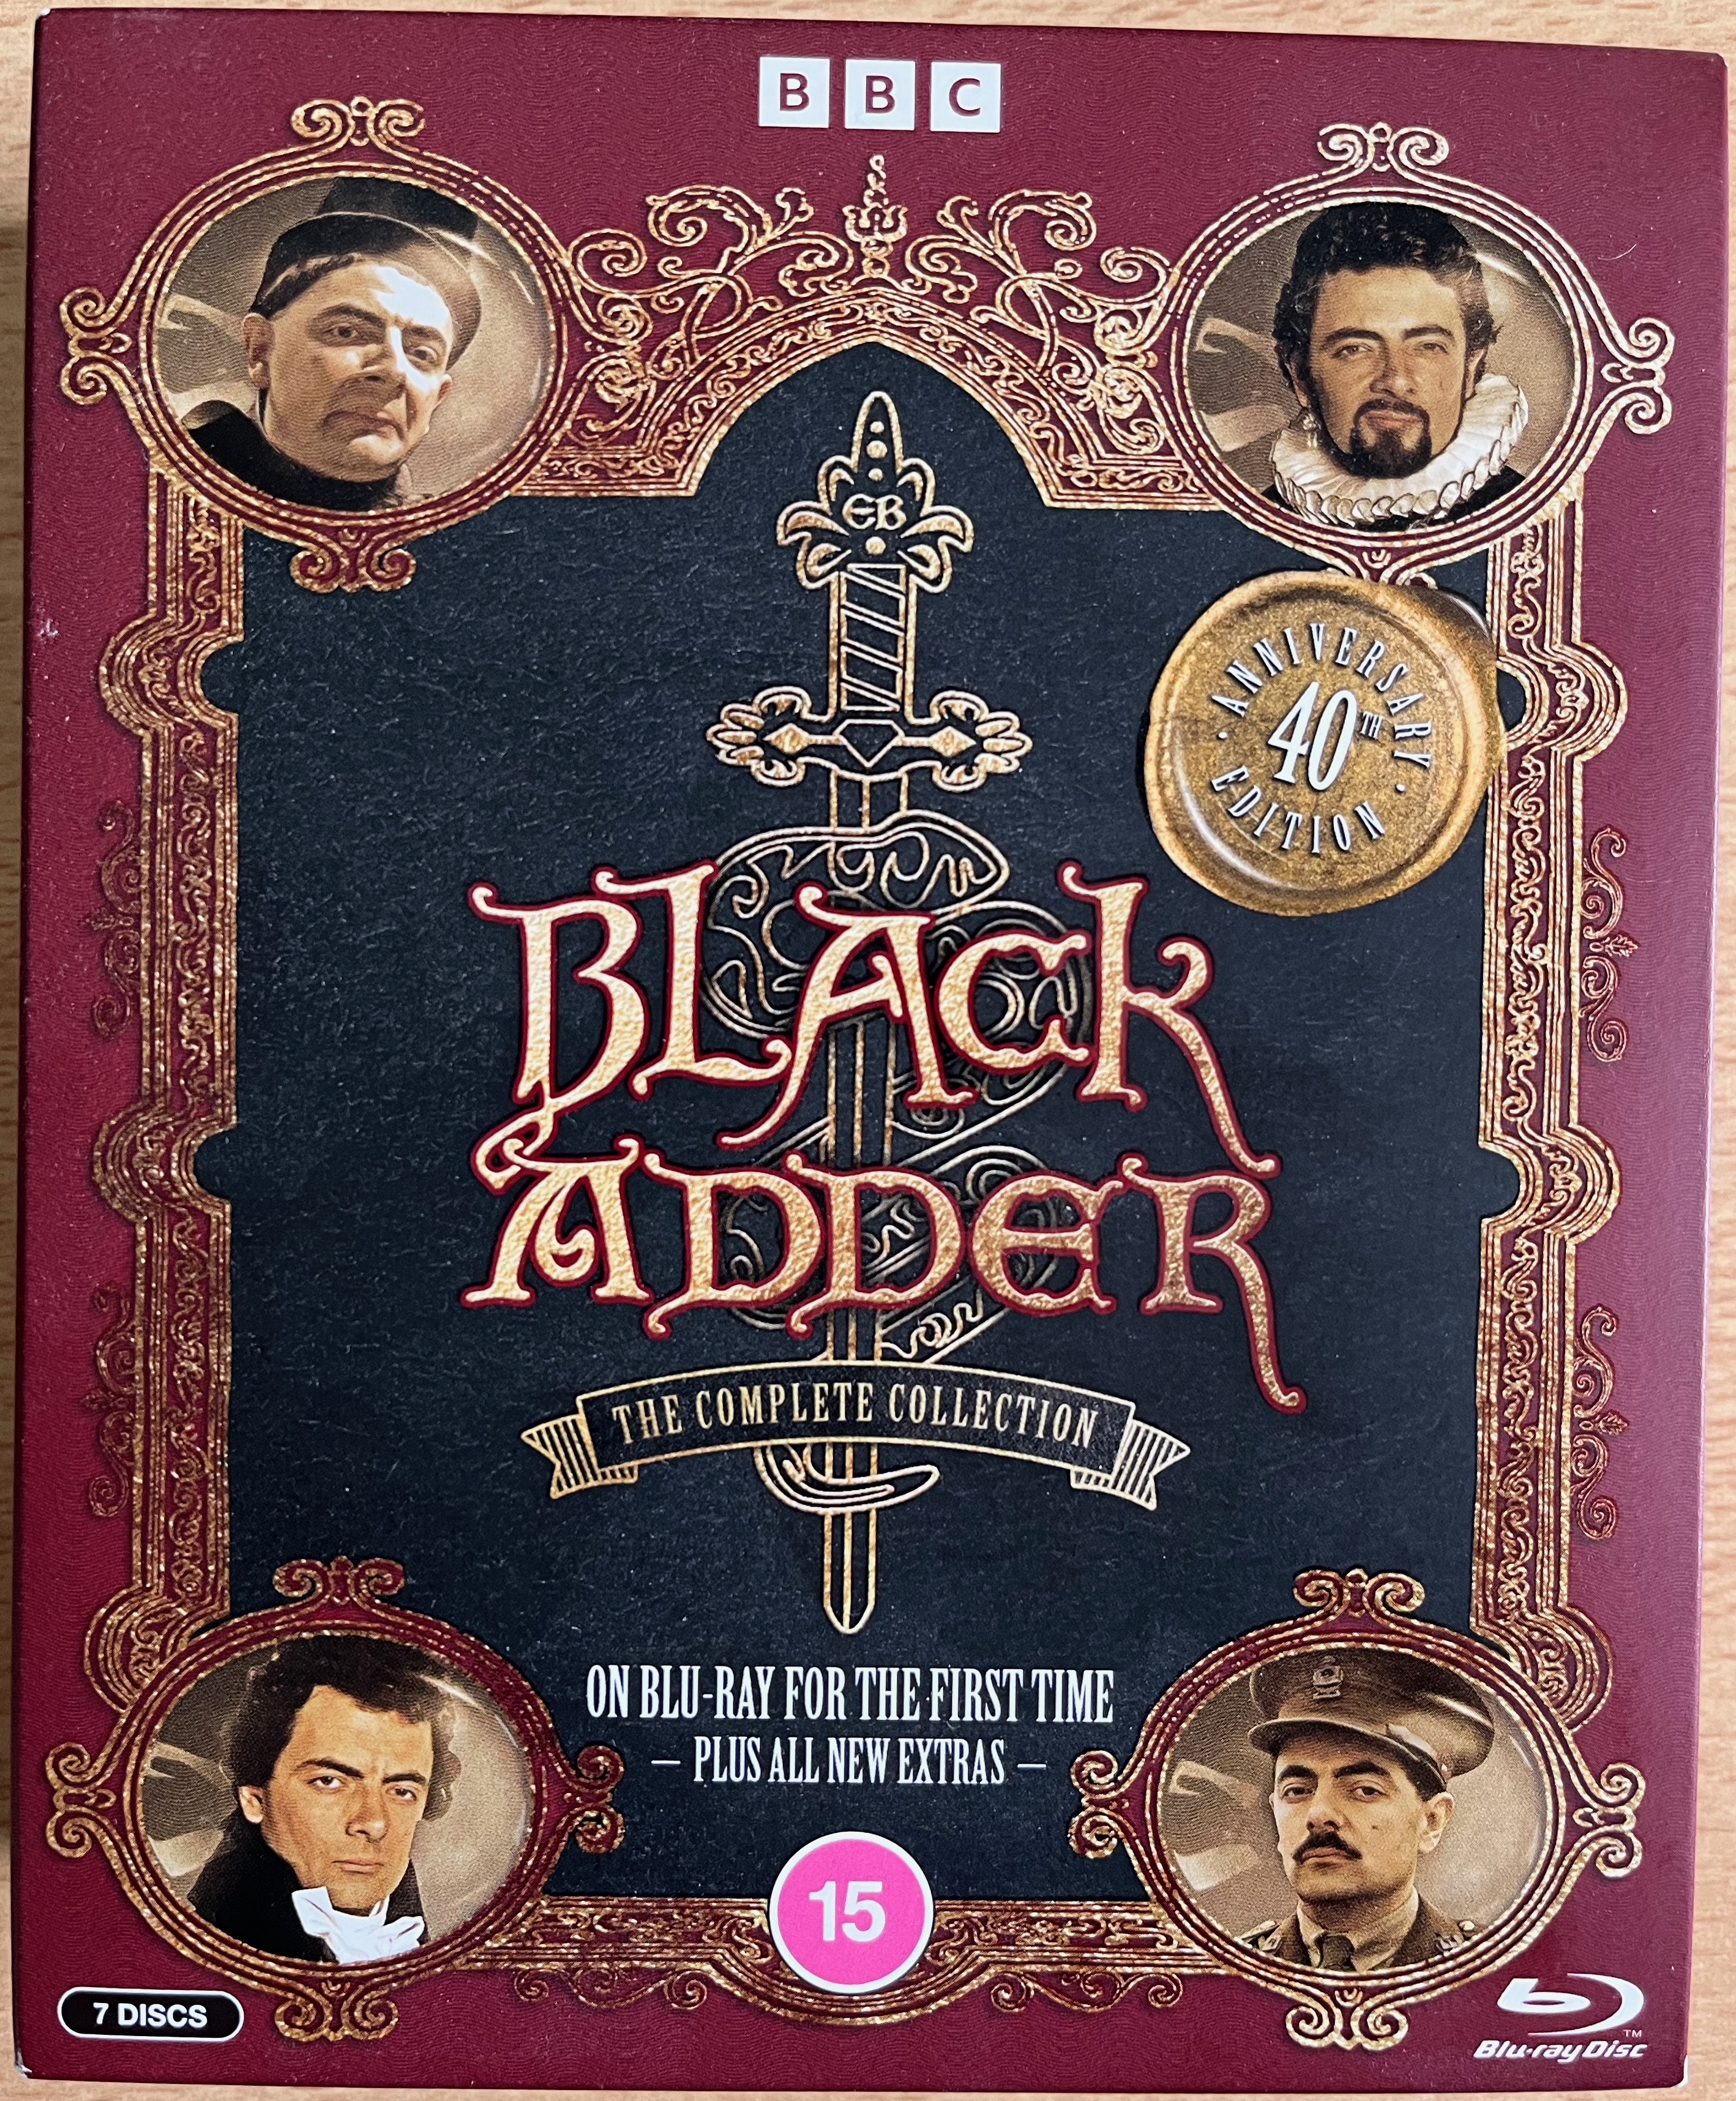 Front cover of Blackadder The Complete Collection, 40th Anniversary Edition, with small text at the bottom saying that it's on Blu-ray for the first time, plus all new extras. An ornate gold border has a circle in each corner, with a photo of Blackadder from each of the 4 series.